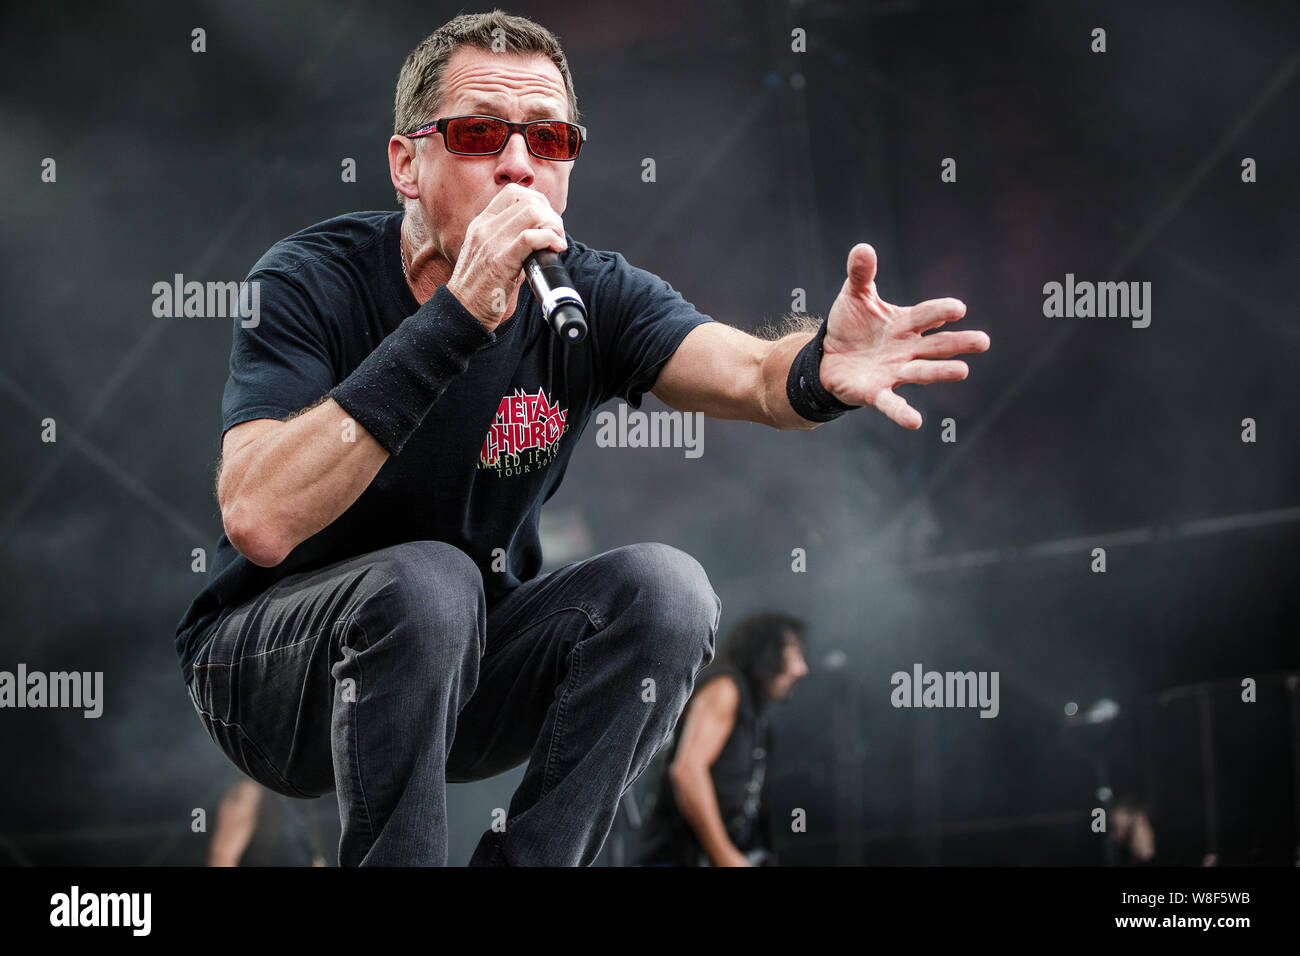 Metal Church perform live on stage at Bloodstock Open Air Festival, UK, 9th Aug, 2019. Stock Photo